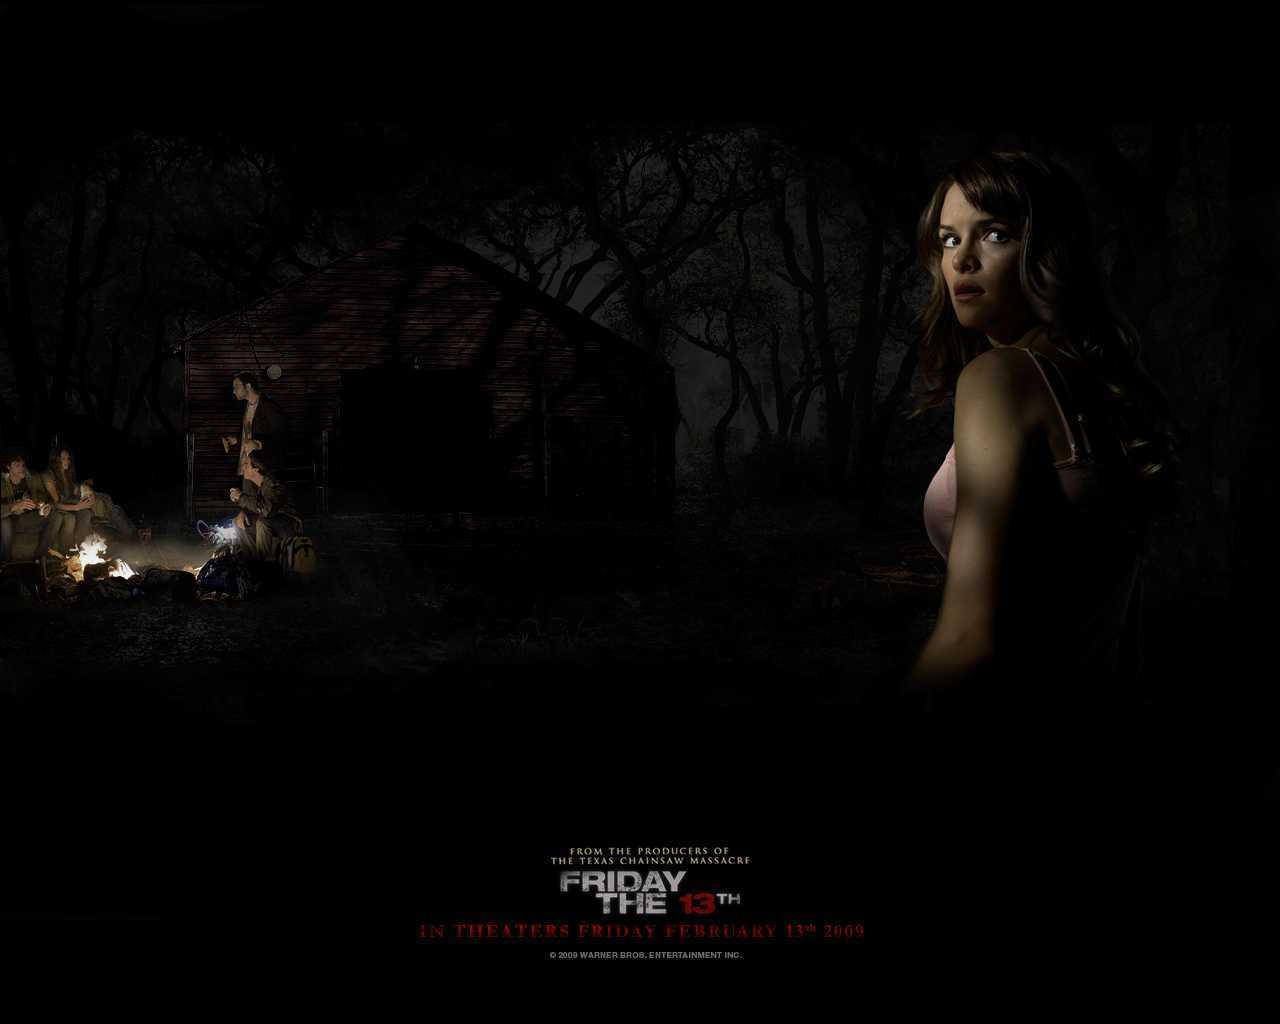 Friday The 13th Wallpaper Danielle Panabaker